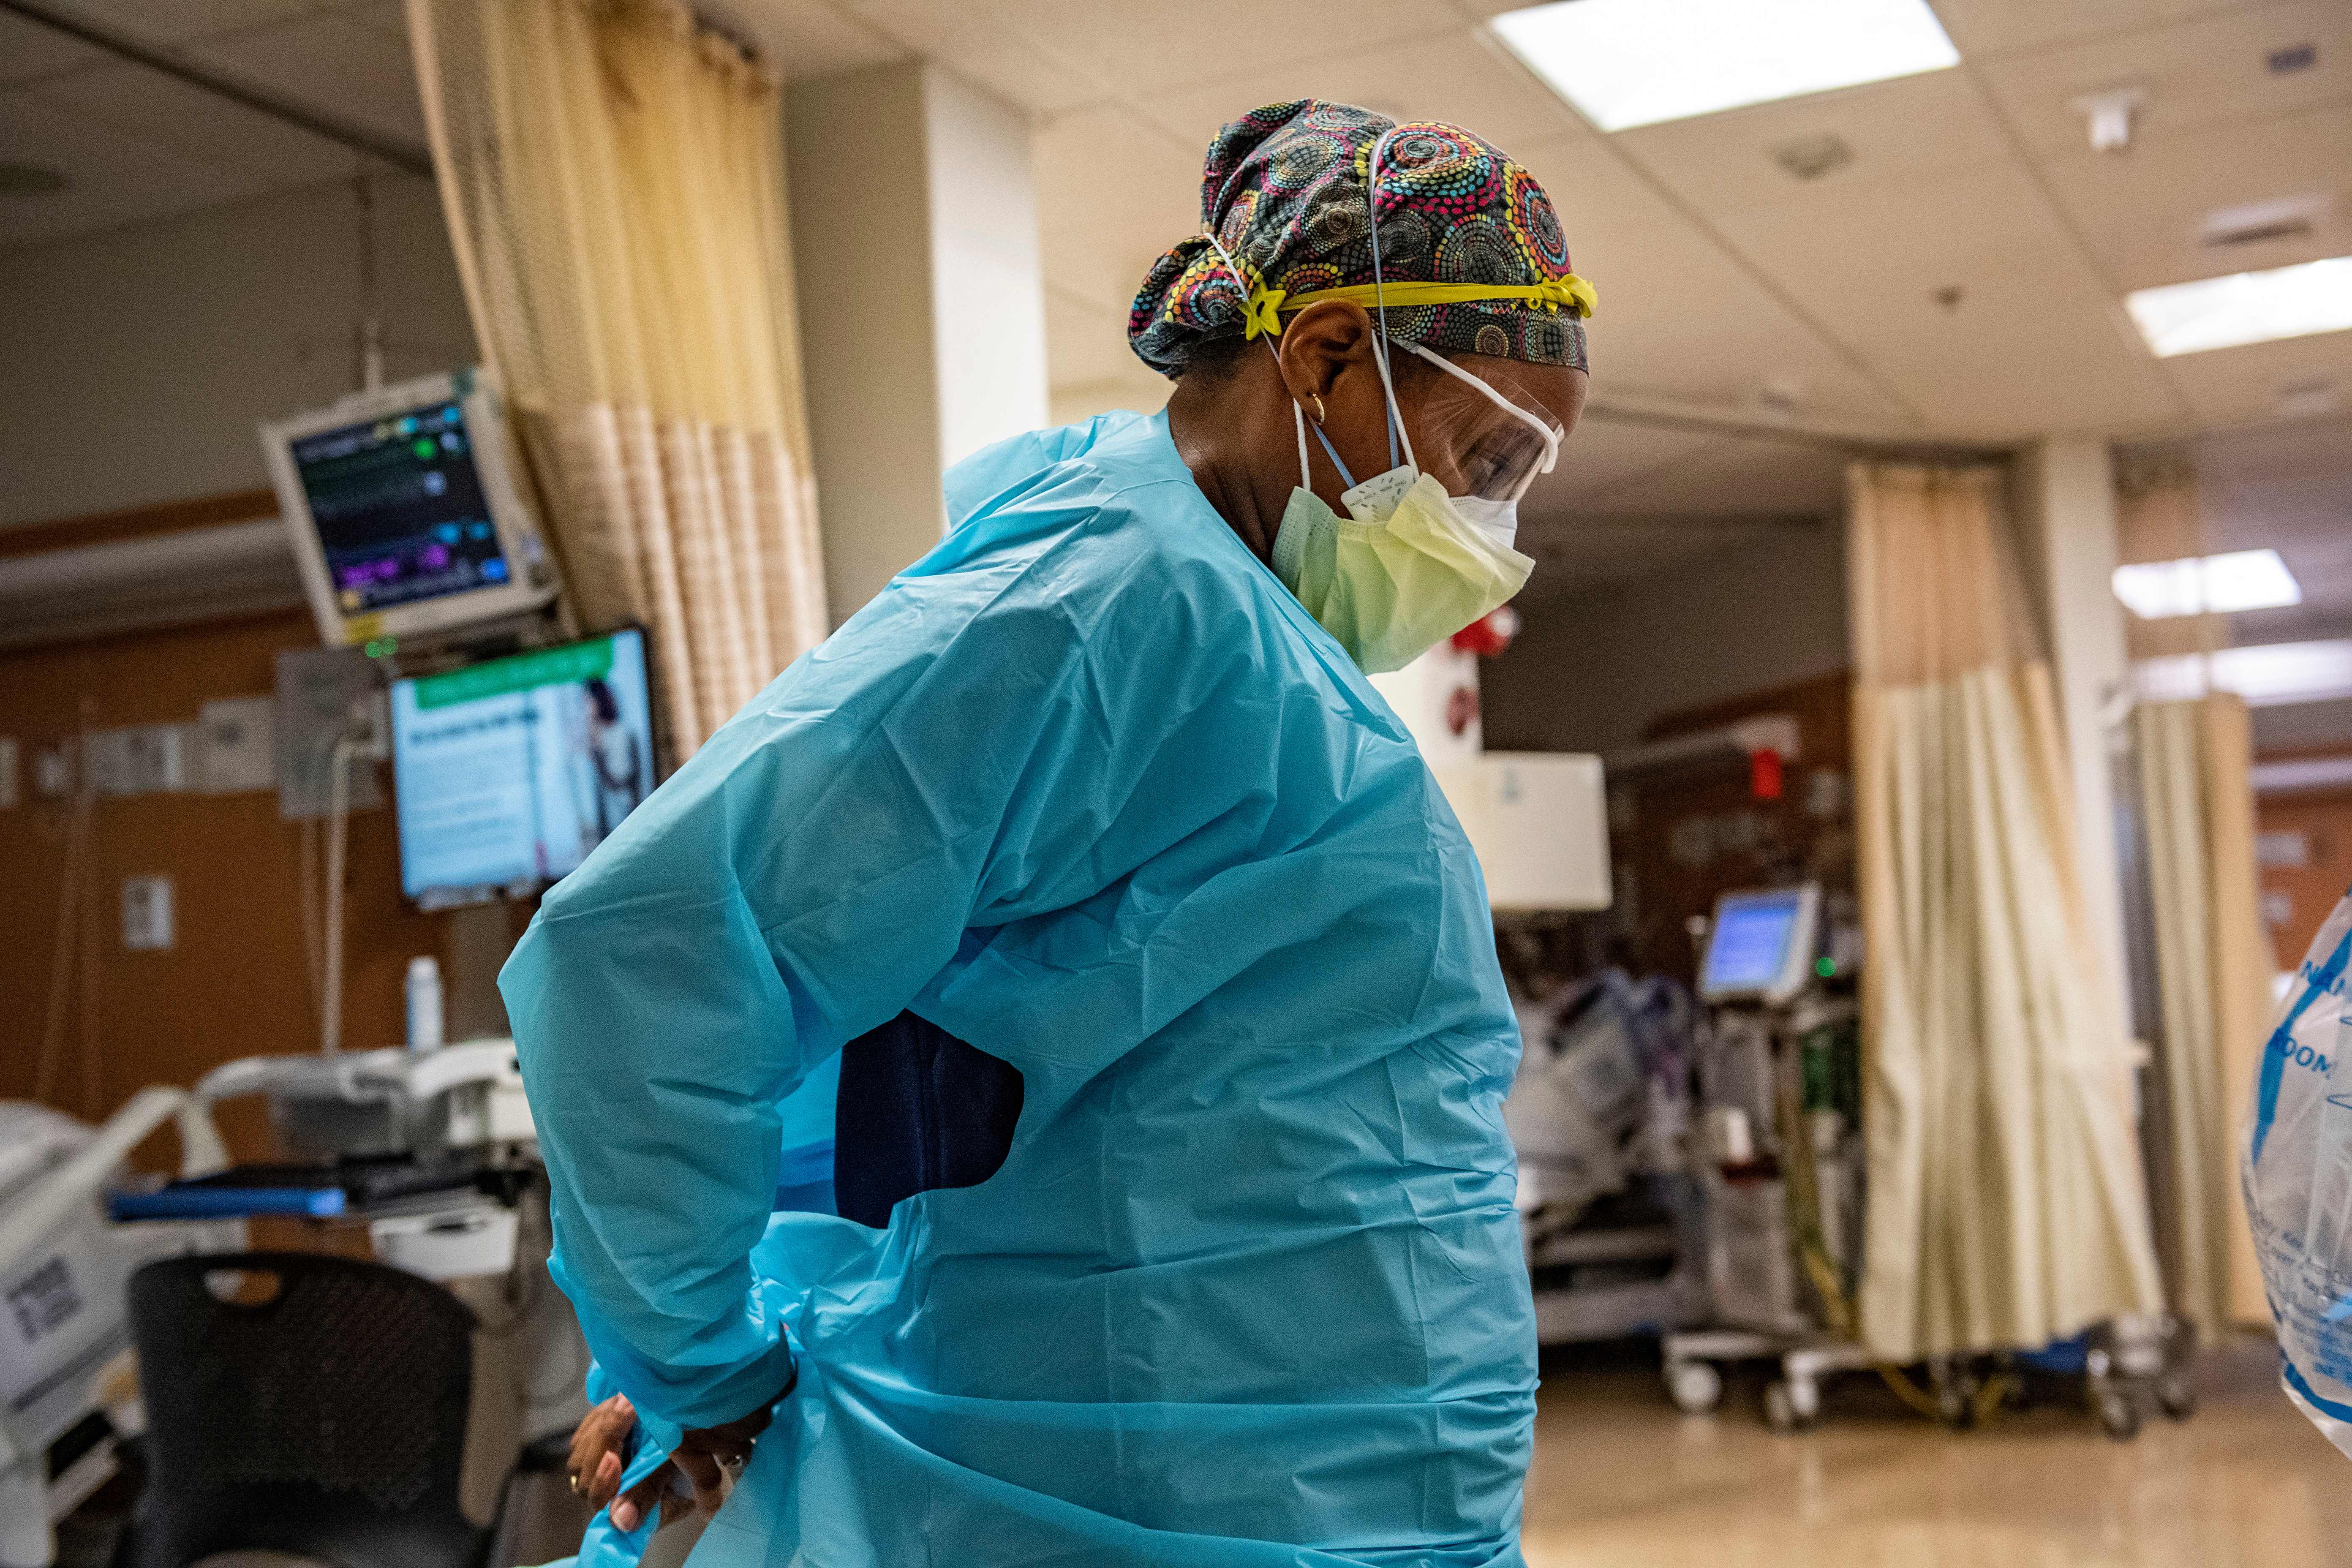 A medical workers puts on PPE before entering a negative pressure room with a Covid-19 patient in the ICU ward at UMass Memorial Medical Center in Worcester, Massachusetts on January 4, 2022.